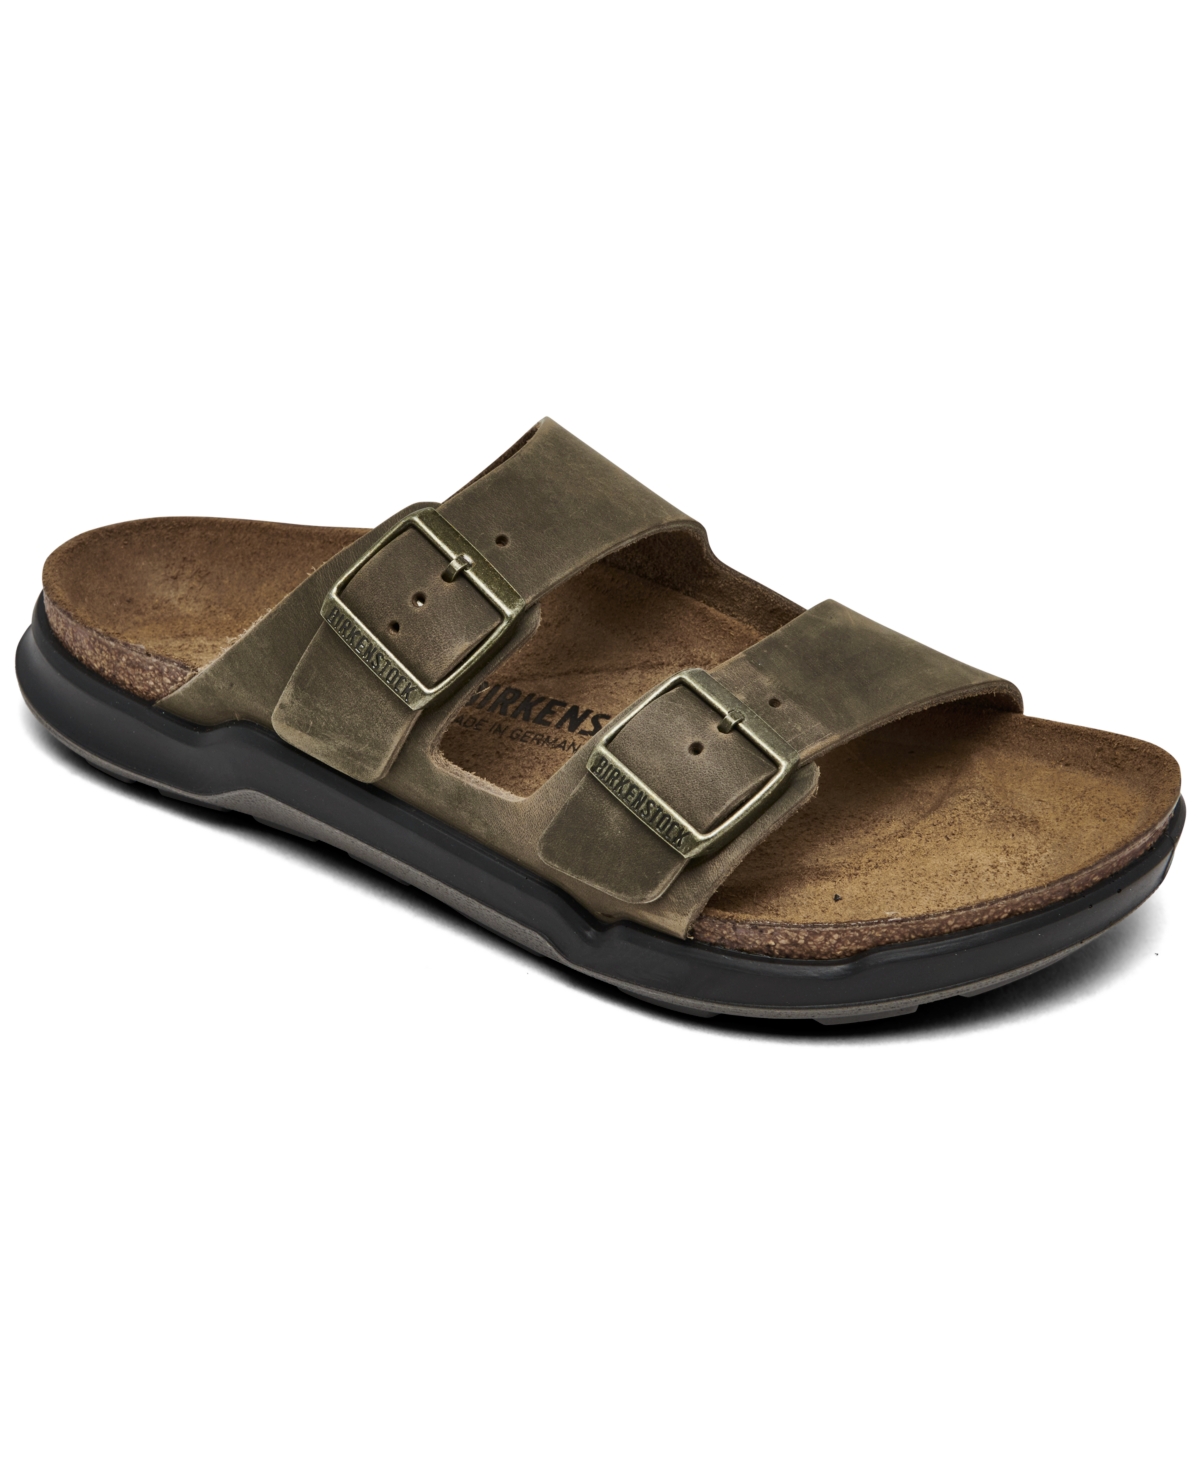 Men's Arizona Crosstown Natural Leather Oiled Two-Strap Sandals from Finish Line - Green